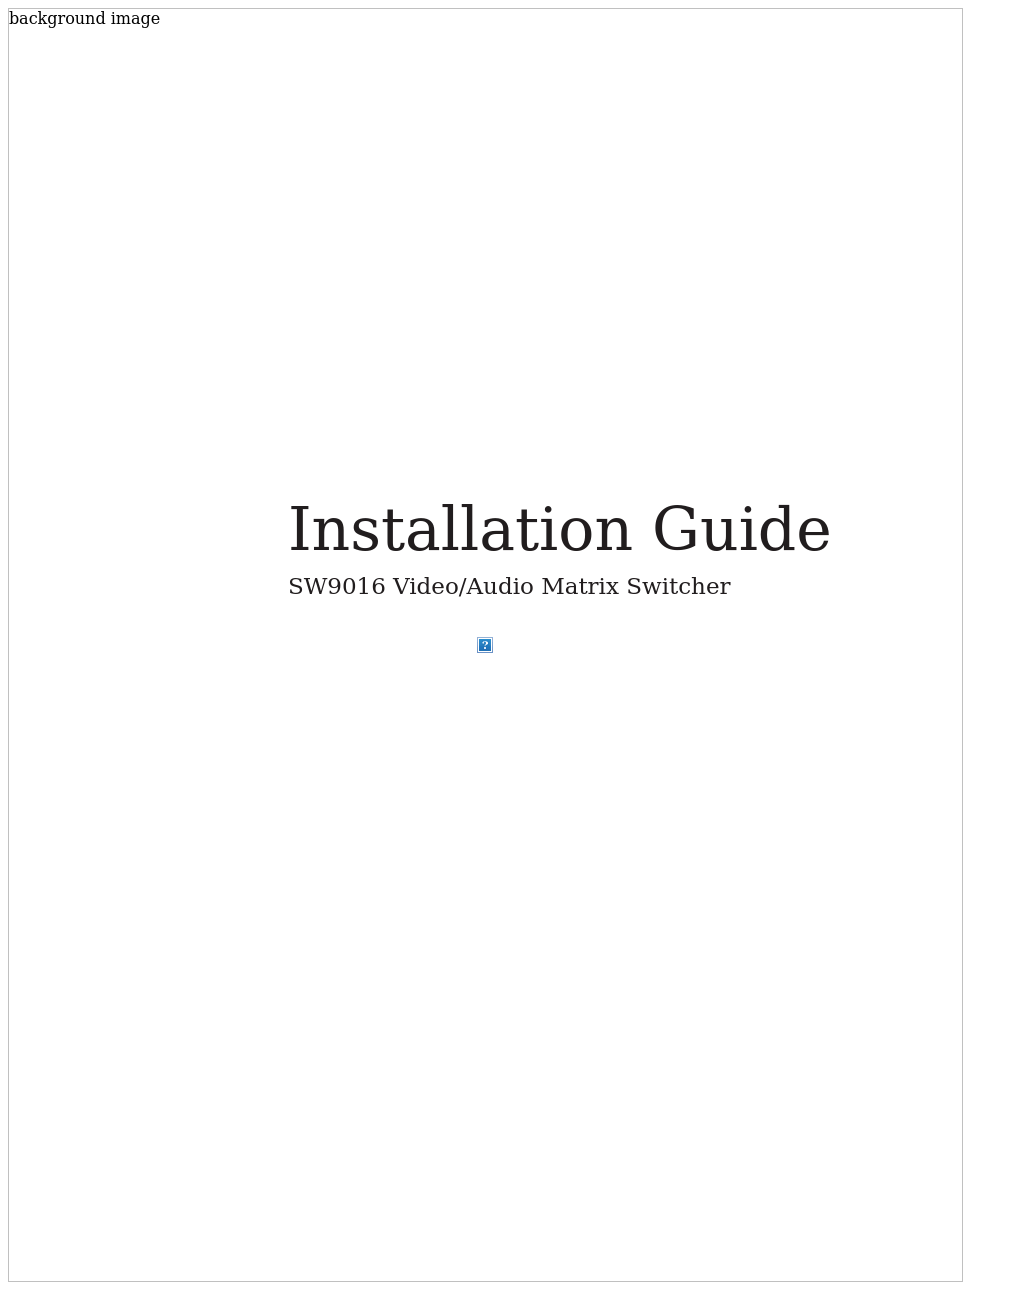 sw9026 Install Guide